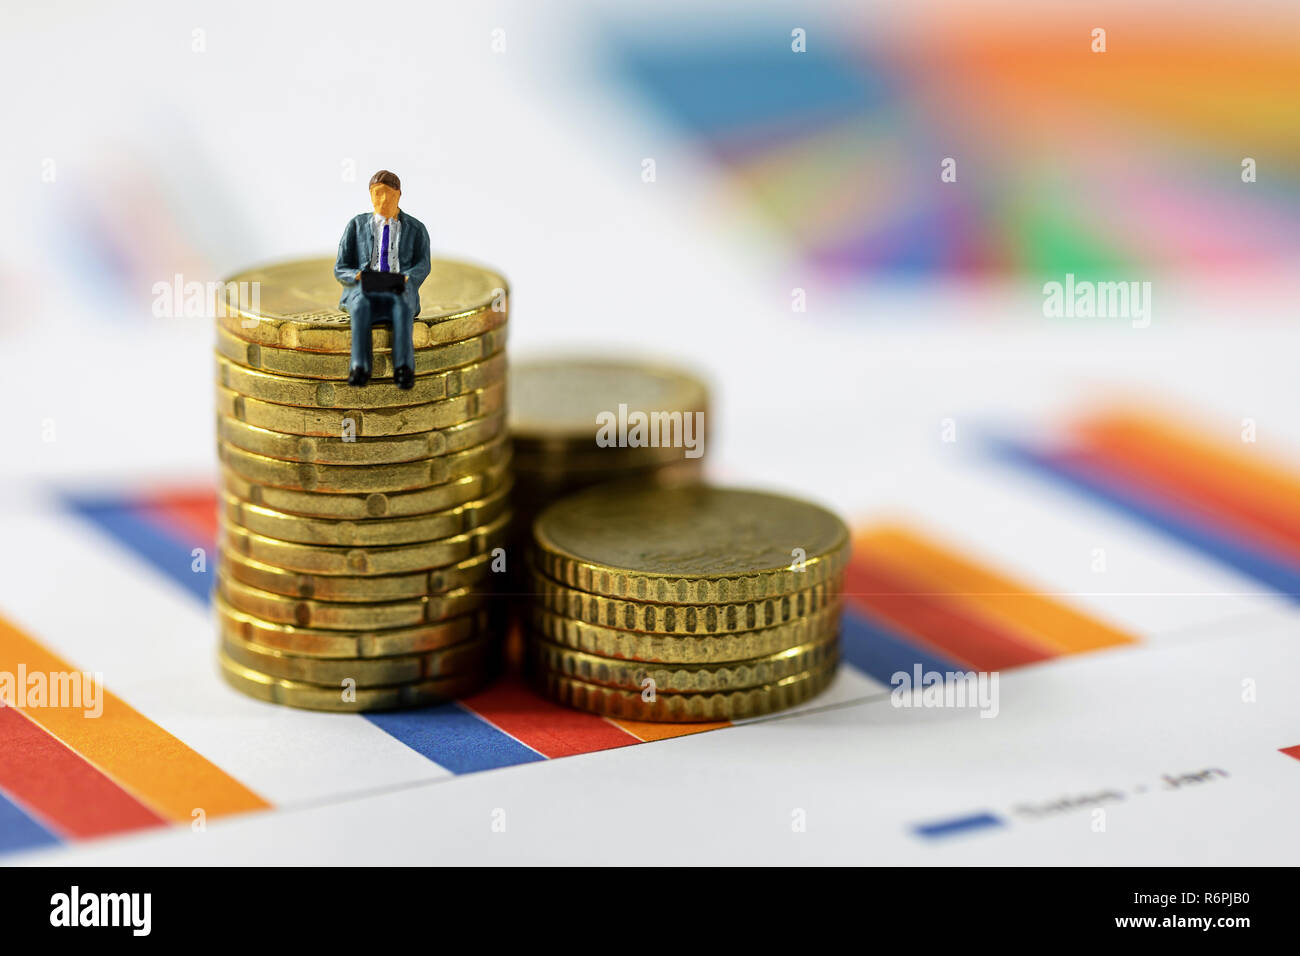 business growth concept - businessman sitting on coin stack Stock Photo